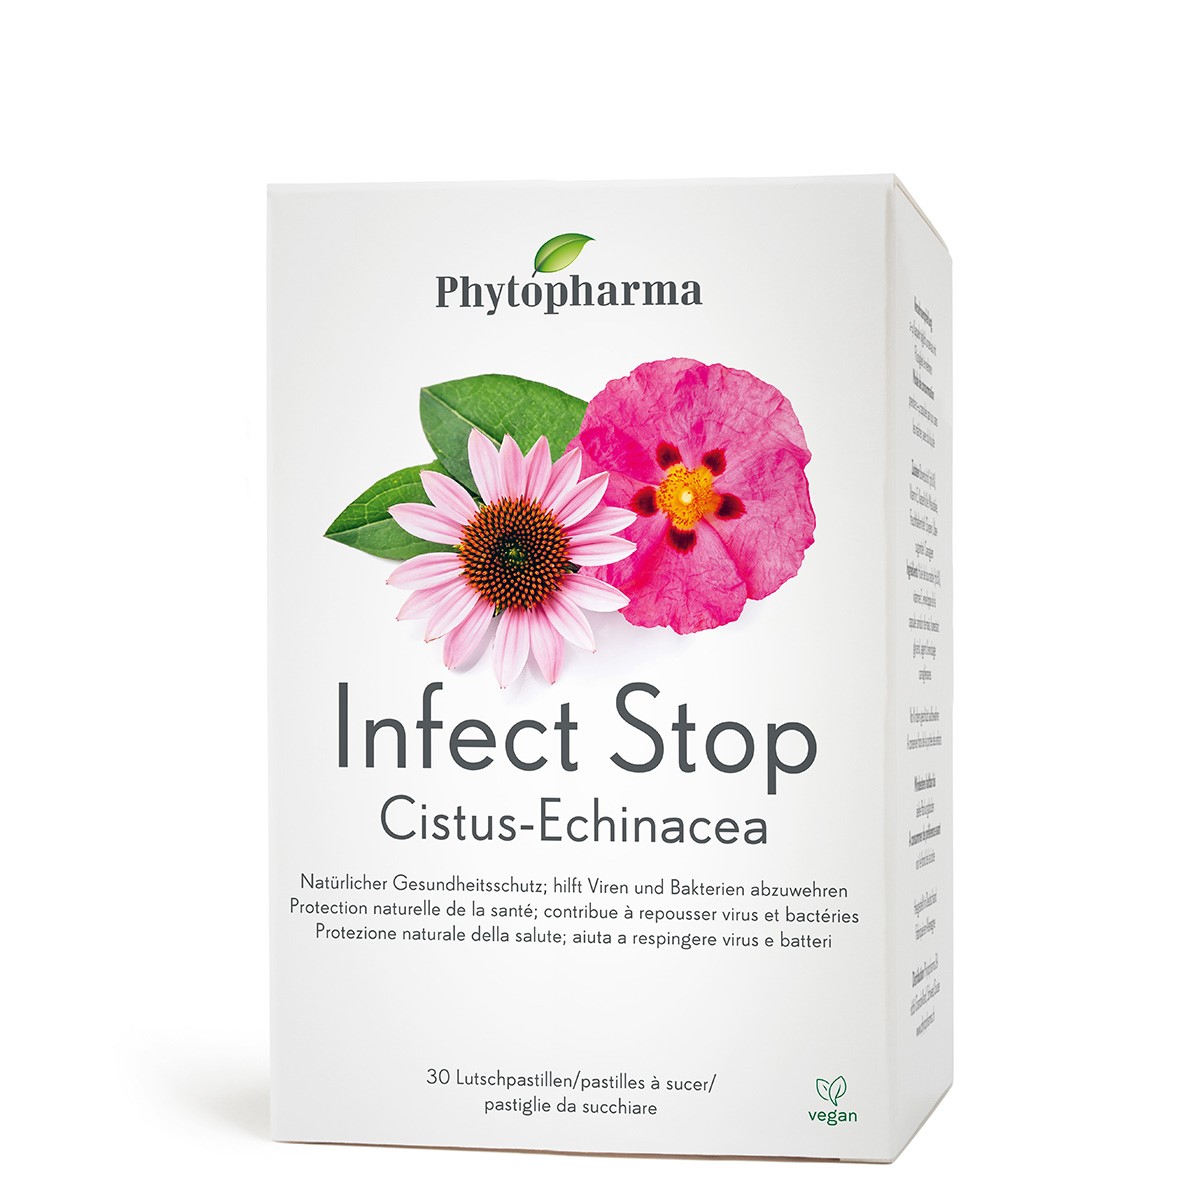 Phytopharma Infect Stop Lutschtbl 30Stk